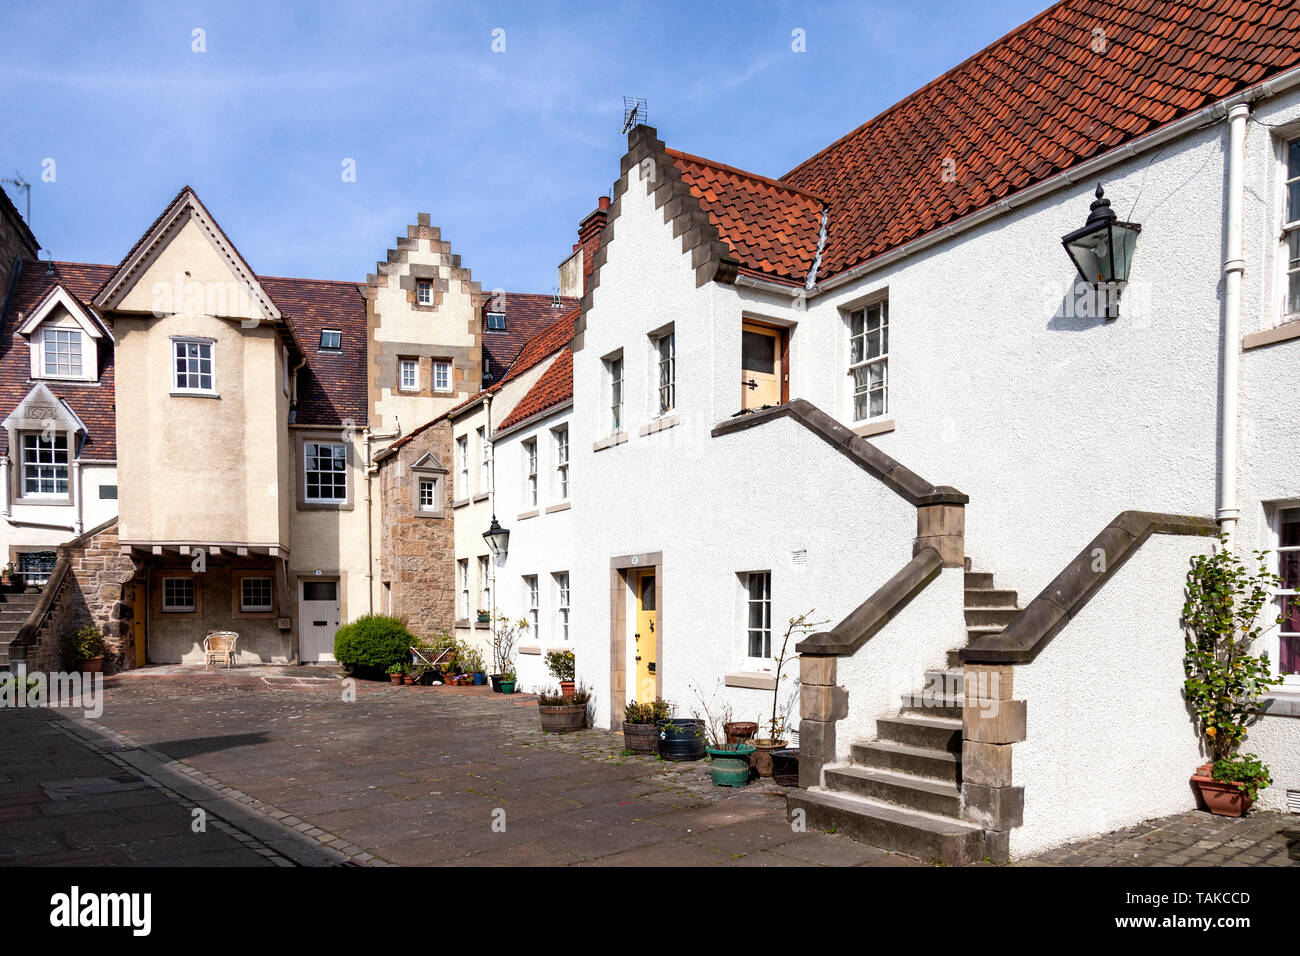 The White Horse Close off Canongate in the Old Town Edinburgh, Scotland, UK. Originating in the 17th century, it was renovated in the 1960s. Stock Photo